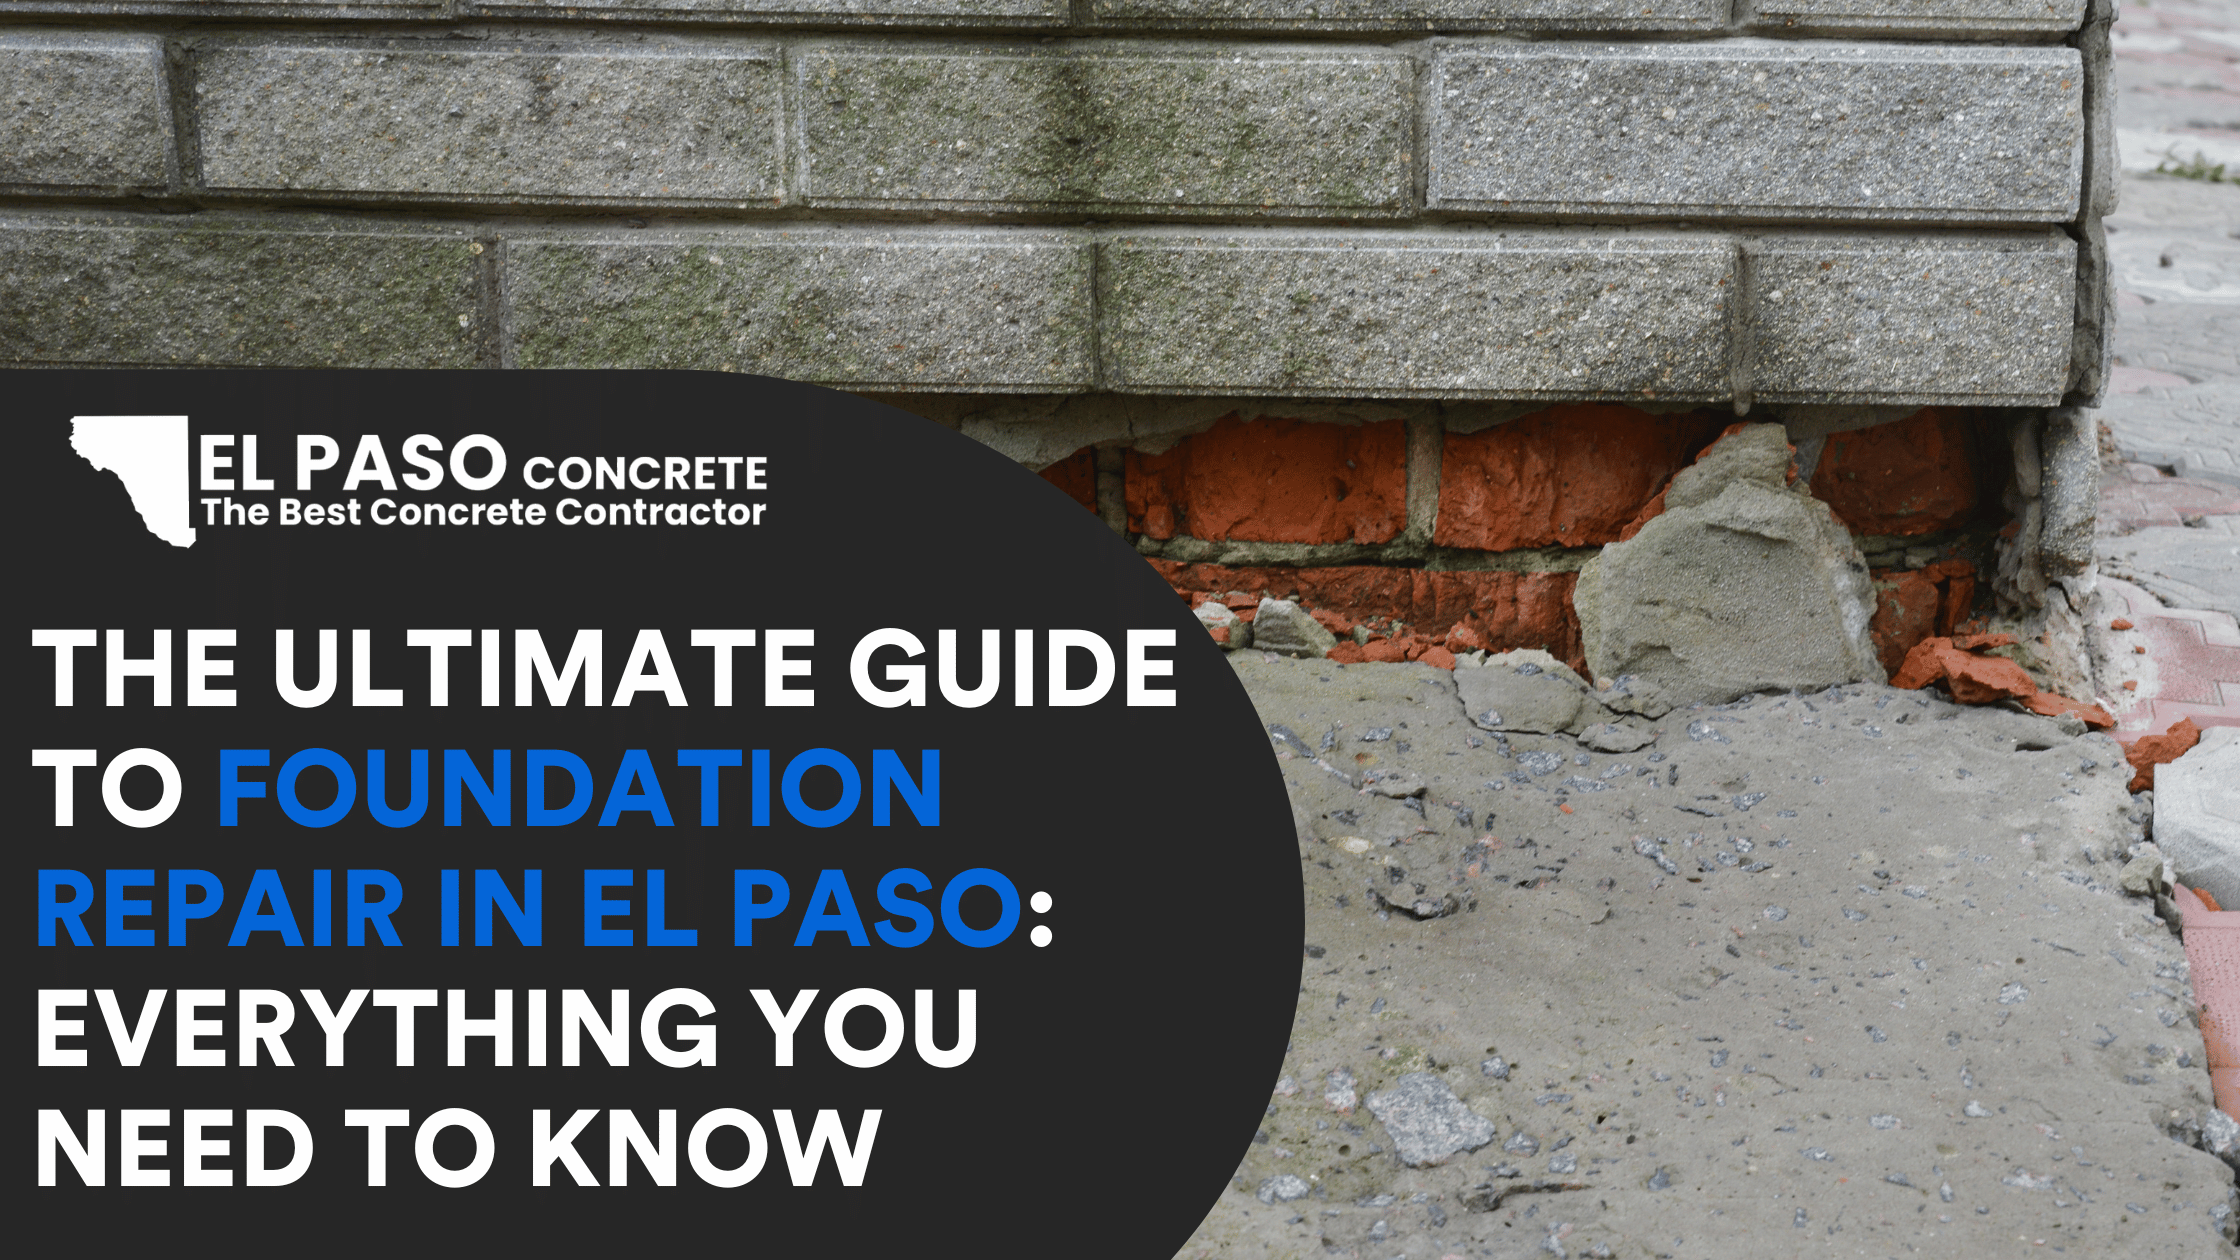 The Ultimate Guide To Foundation Repair in El Paso: Everything You Need to Know